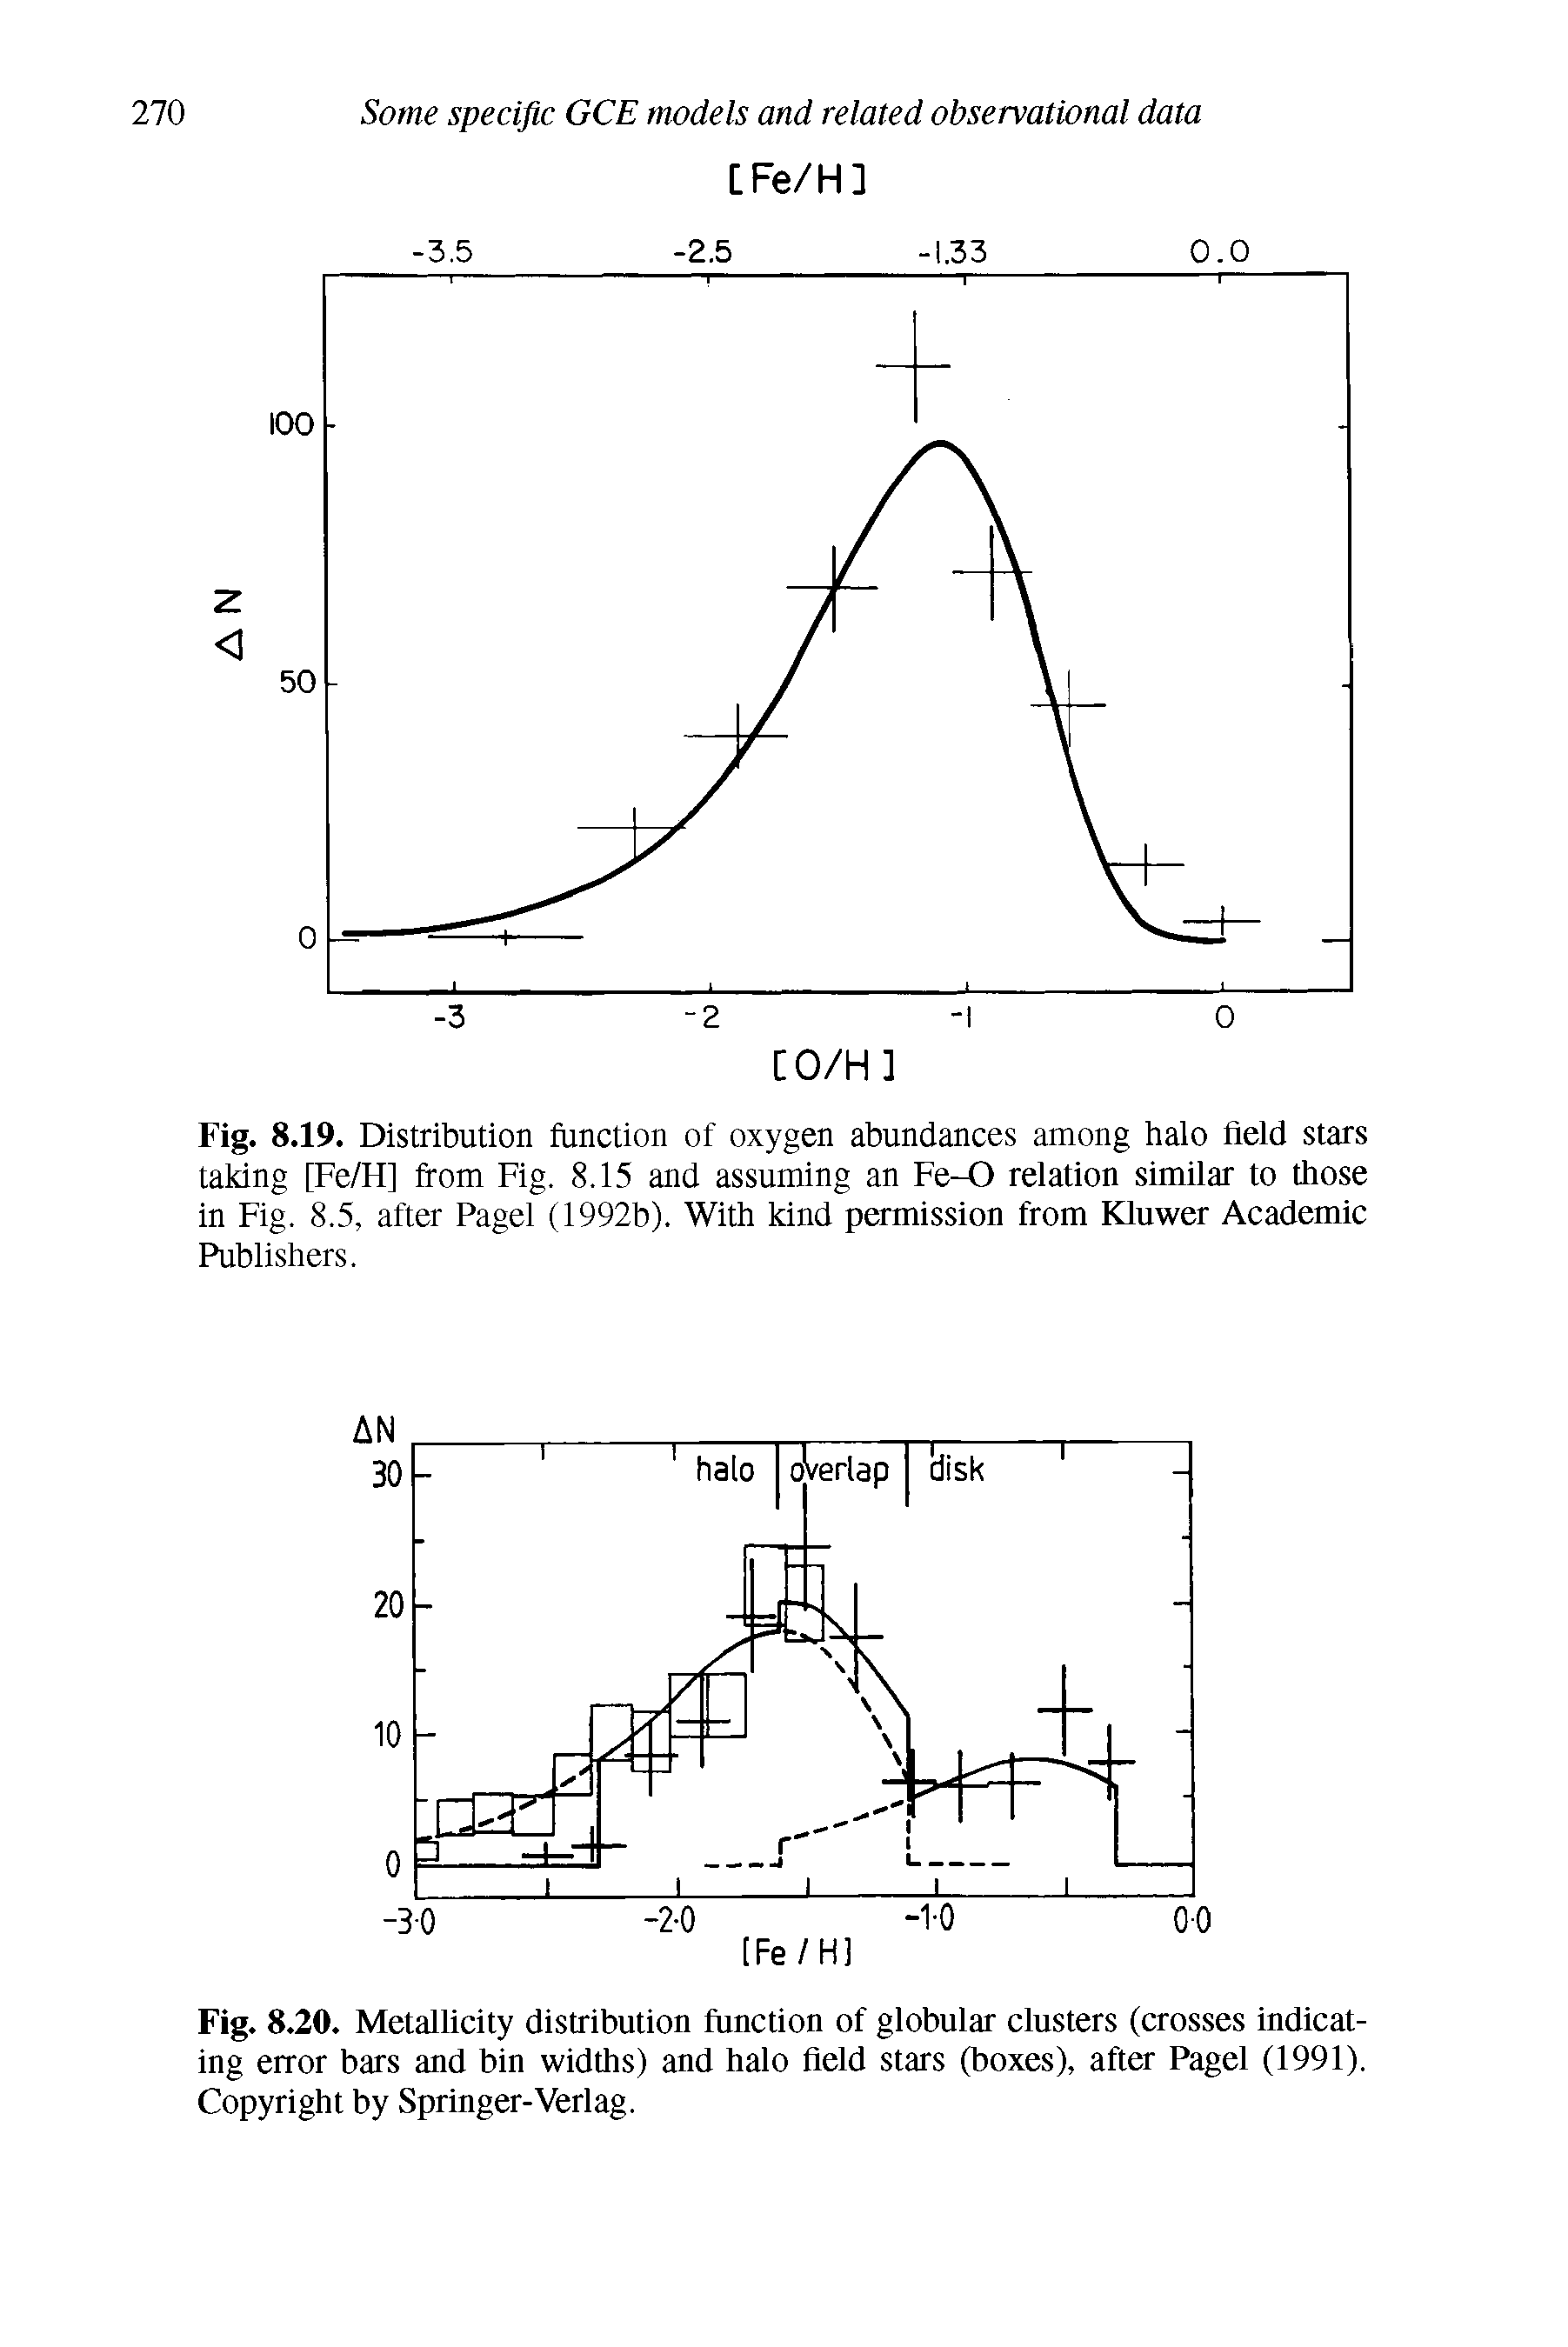 Fig. 8.20. Metallicity distribution function of globular clusters (crosses indicating error bars and bin widths) and halo field stars (boxes), after Pagel (1991). Copyright by Springer-Verlag.